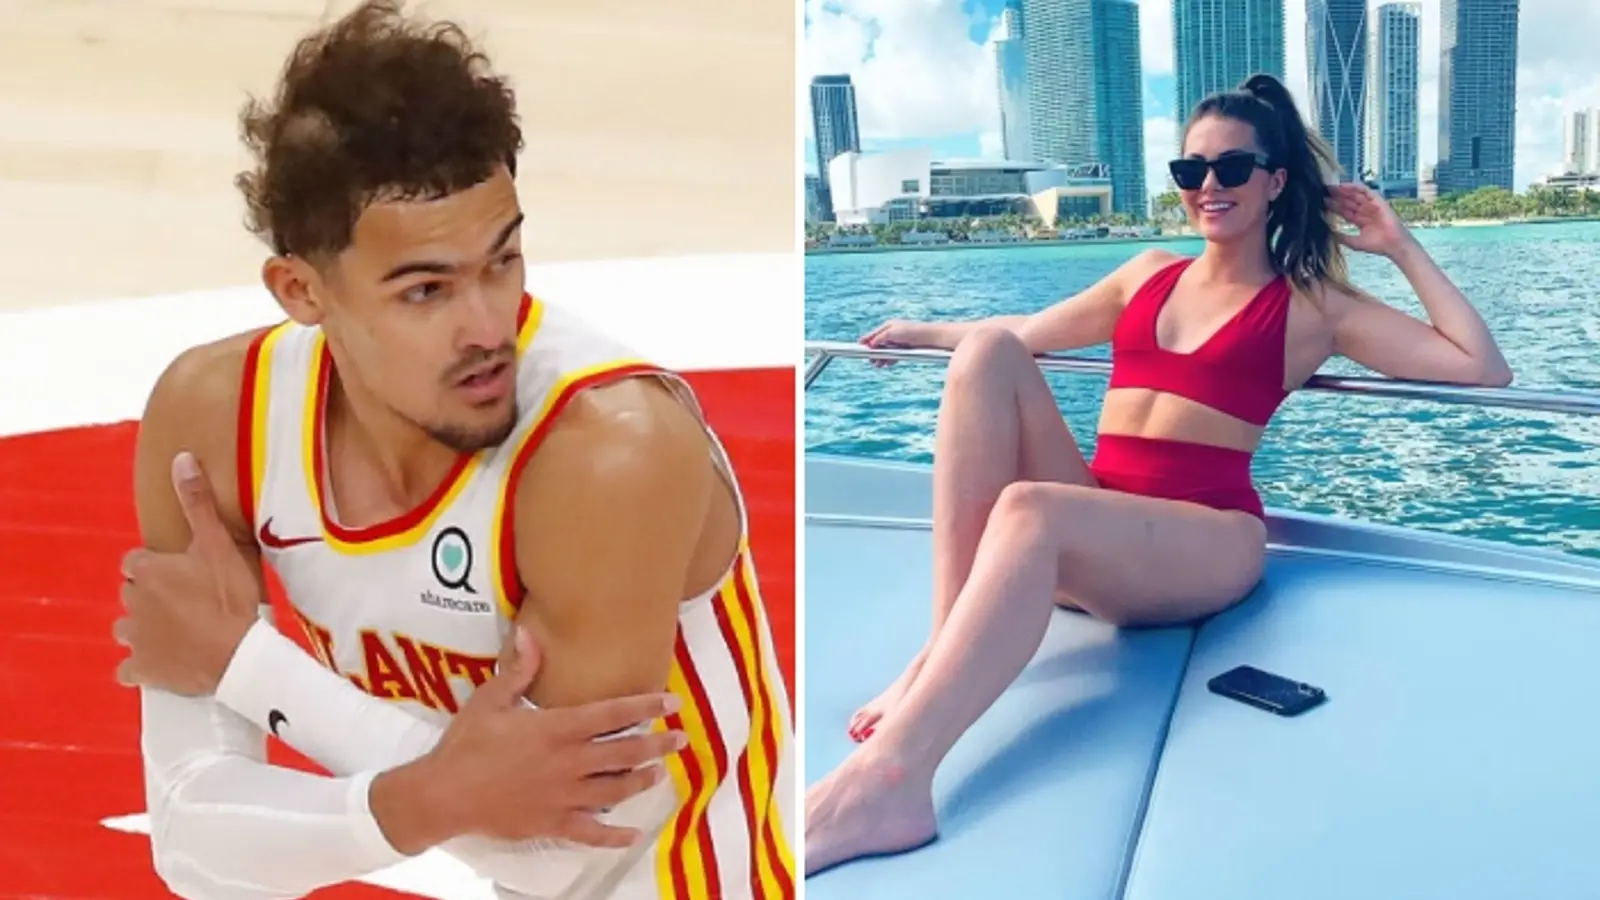 WATCH: Trae Young marries long-time girlfriend Shelby Miller